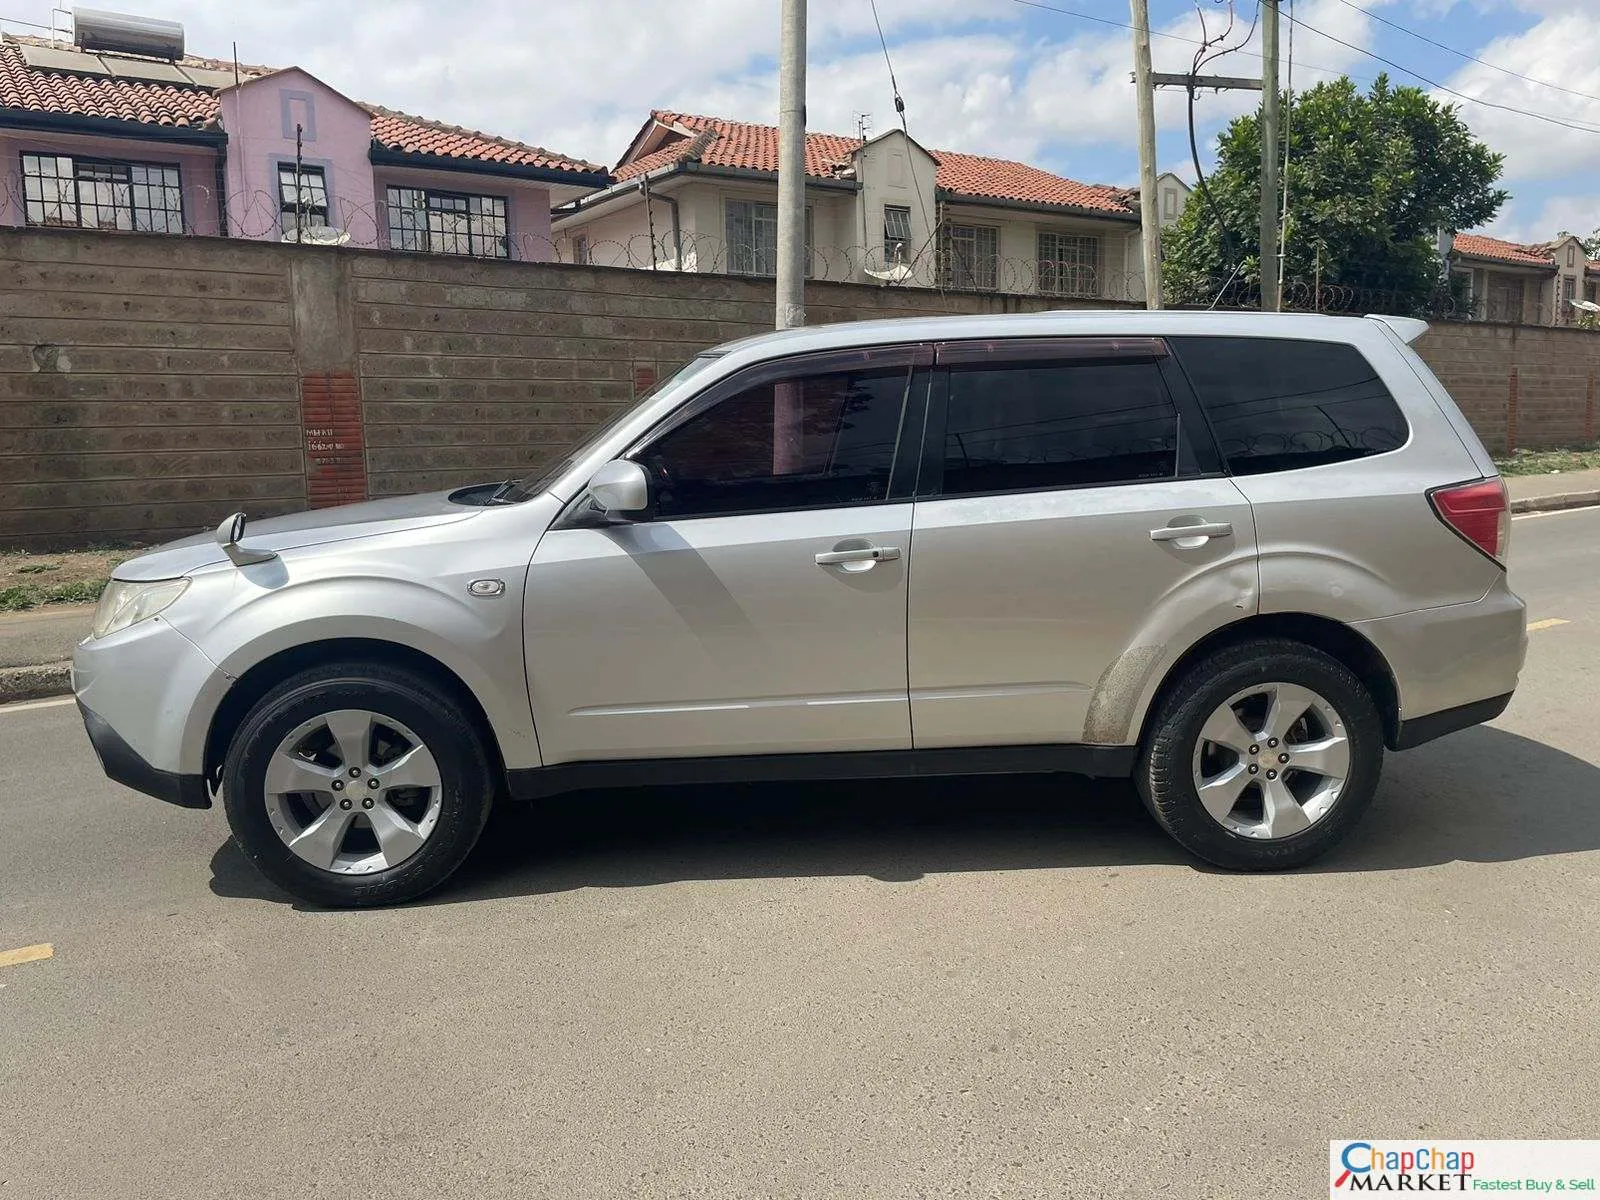 Cars Cars For Sale/Vehicles-Subaru Forester Turbo MANUAL for sale in Kenya Pay % deposit Trade in Ok EXCLUSIVE 9